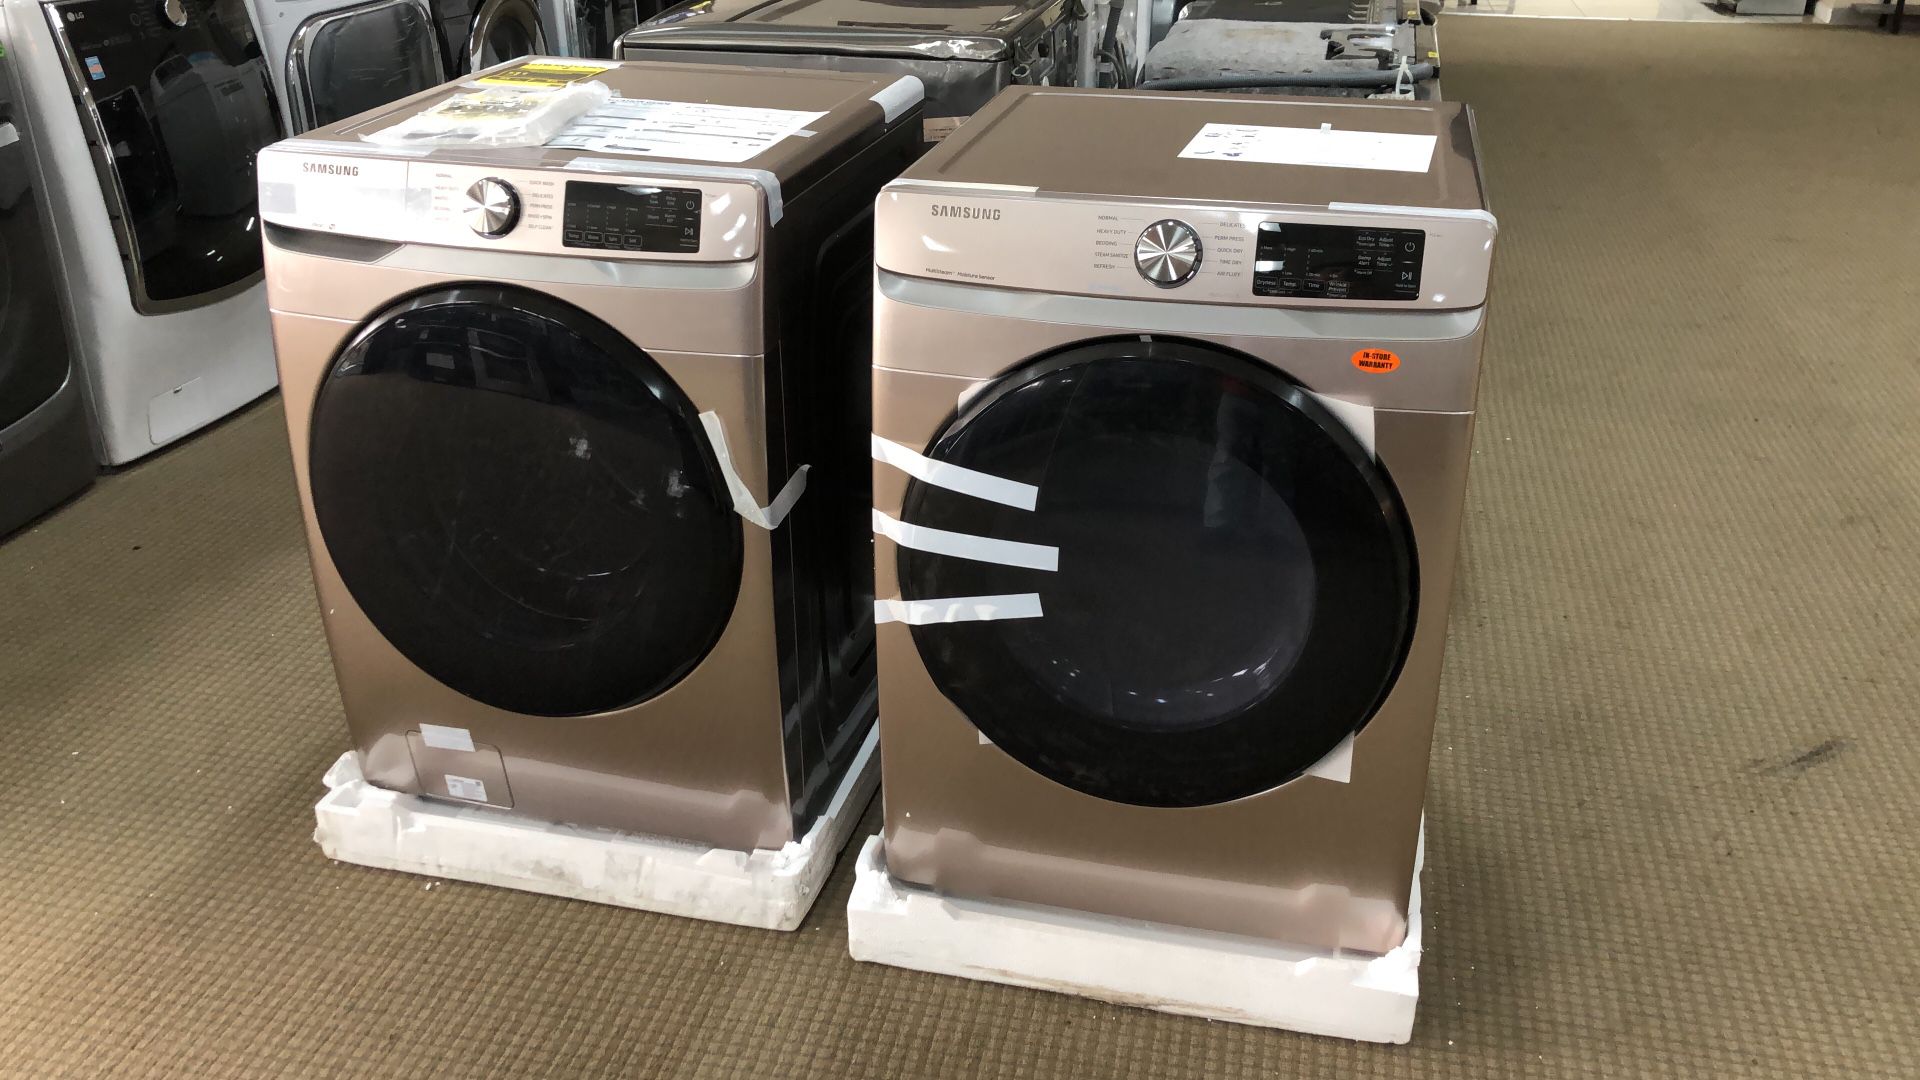 Brand new rose gold Samsung front load washer and dryer set. $39 down!